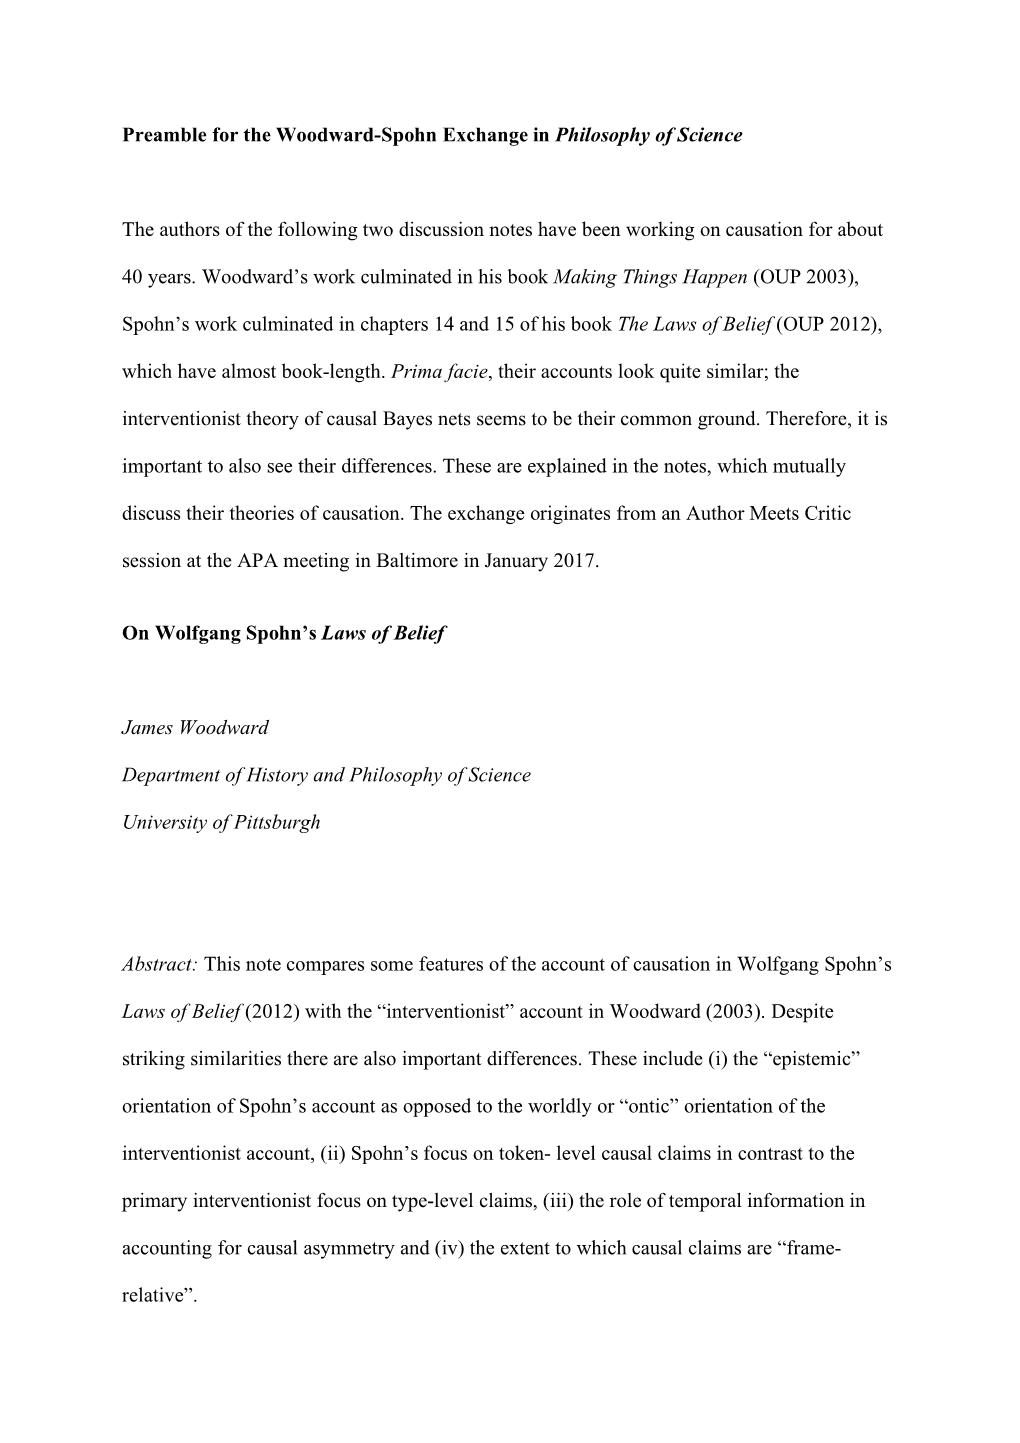 Preamble for the Woodward-Spohn Exchange in Philosophy of Science